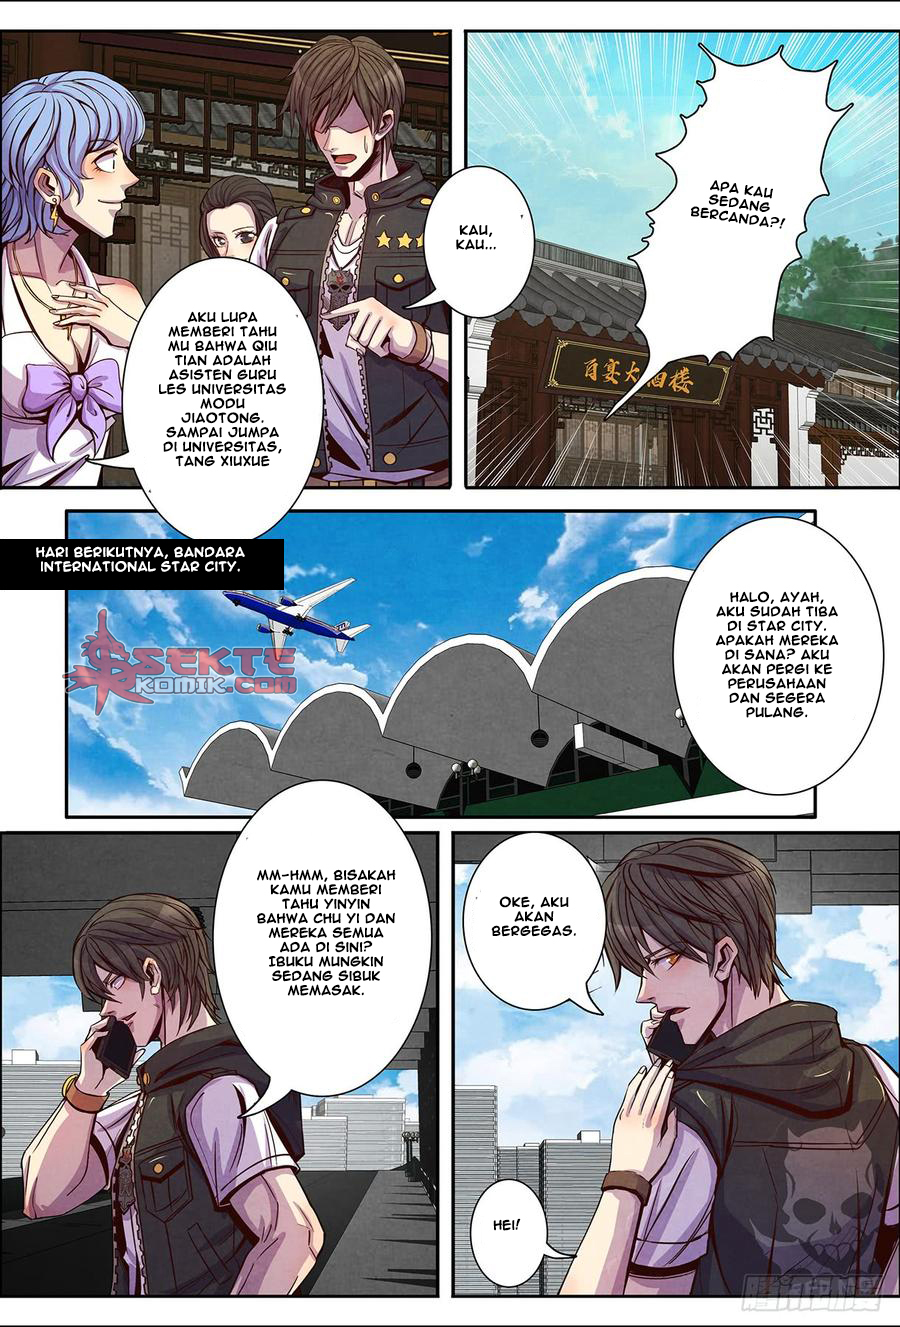 Return From the World of Immortals Chapter 133